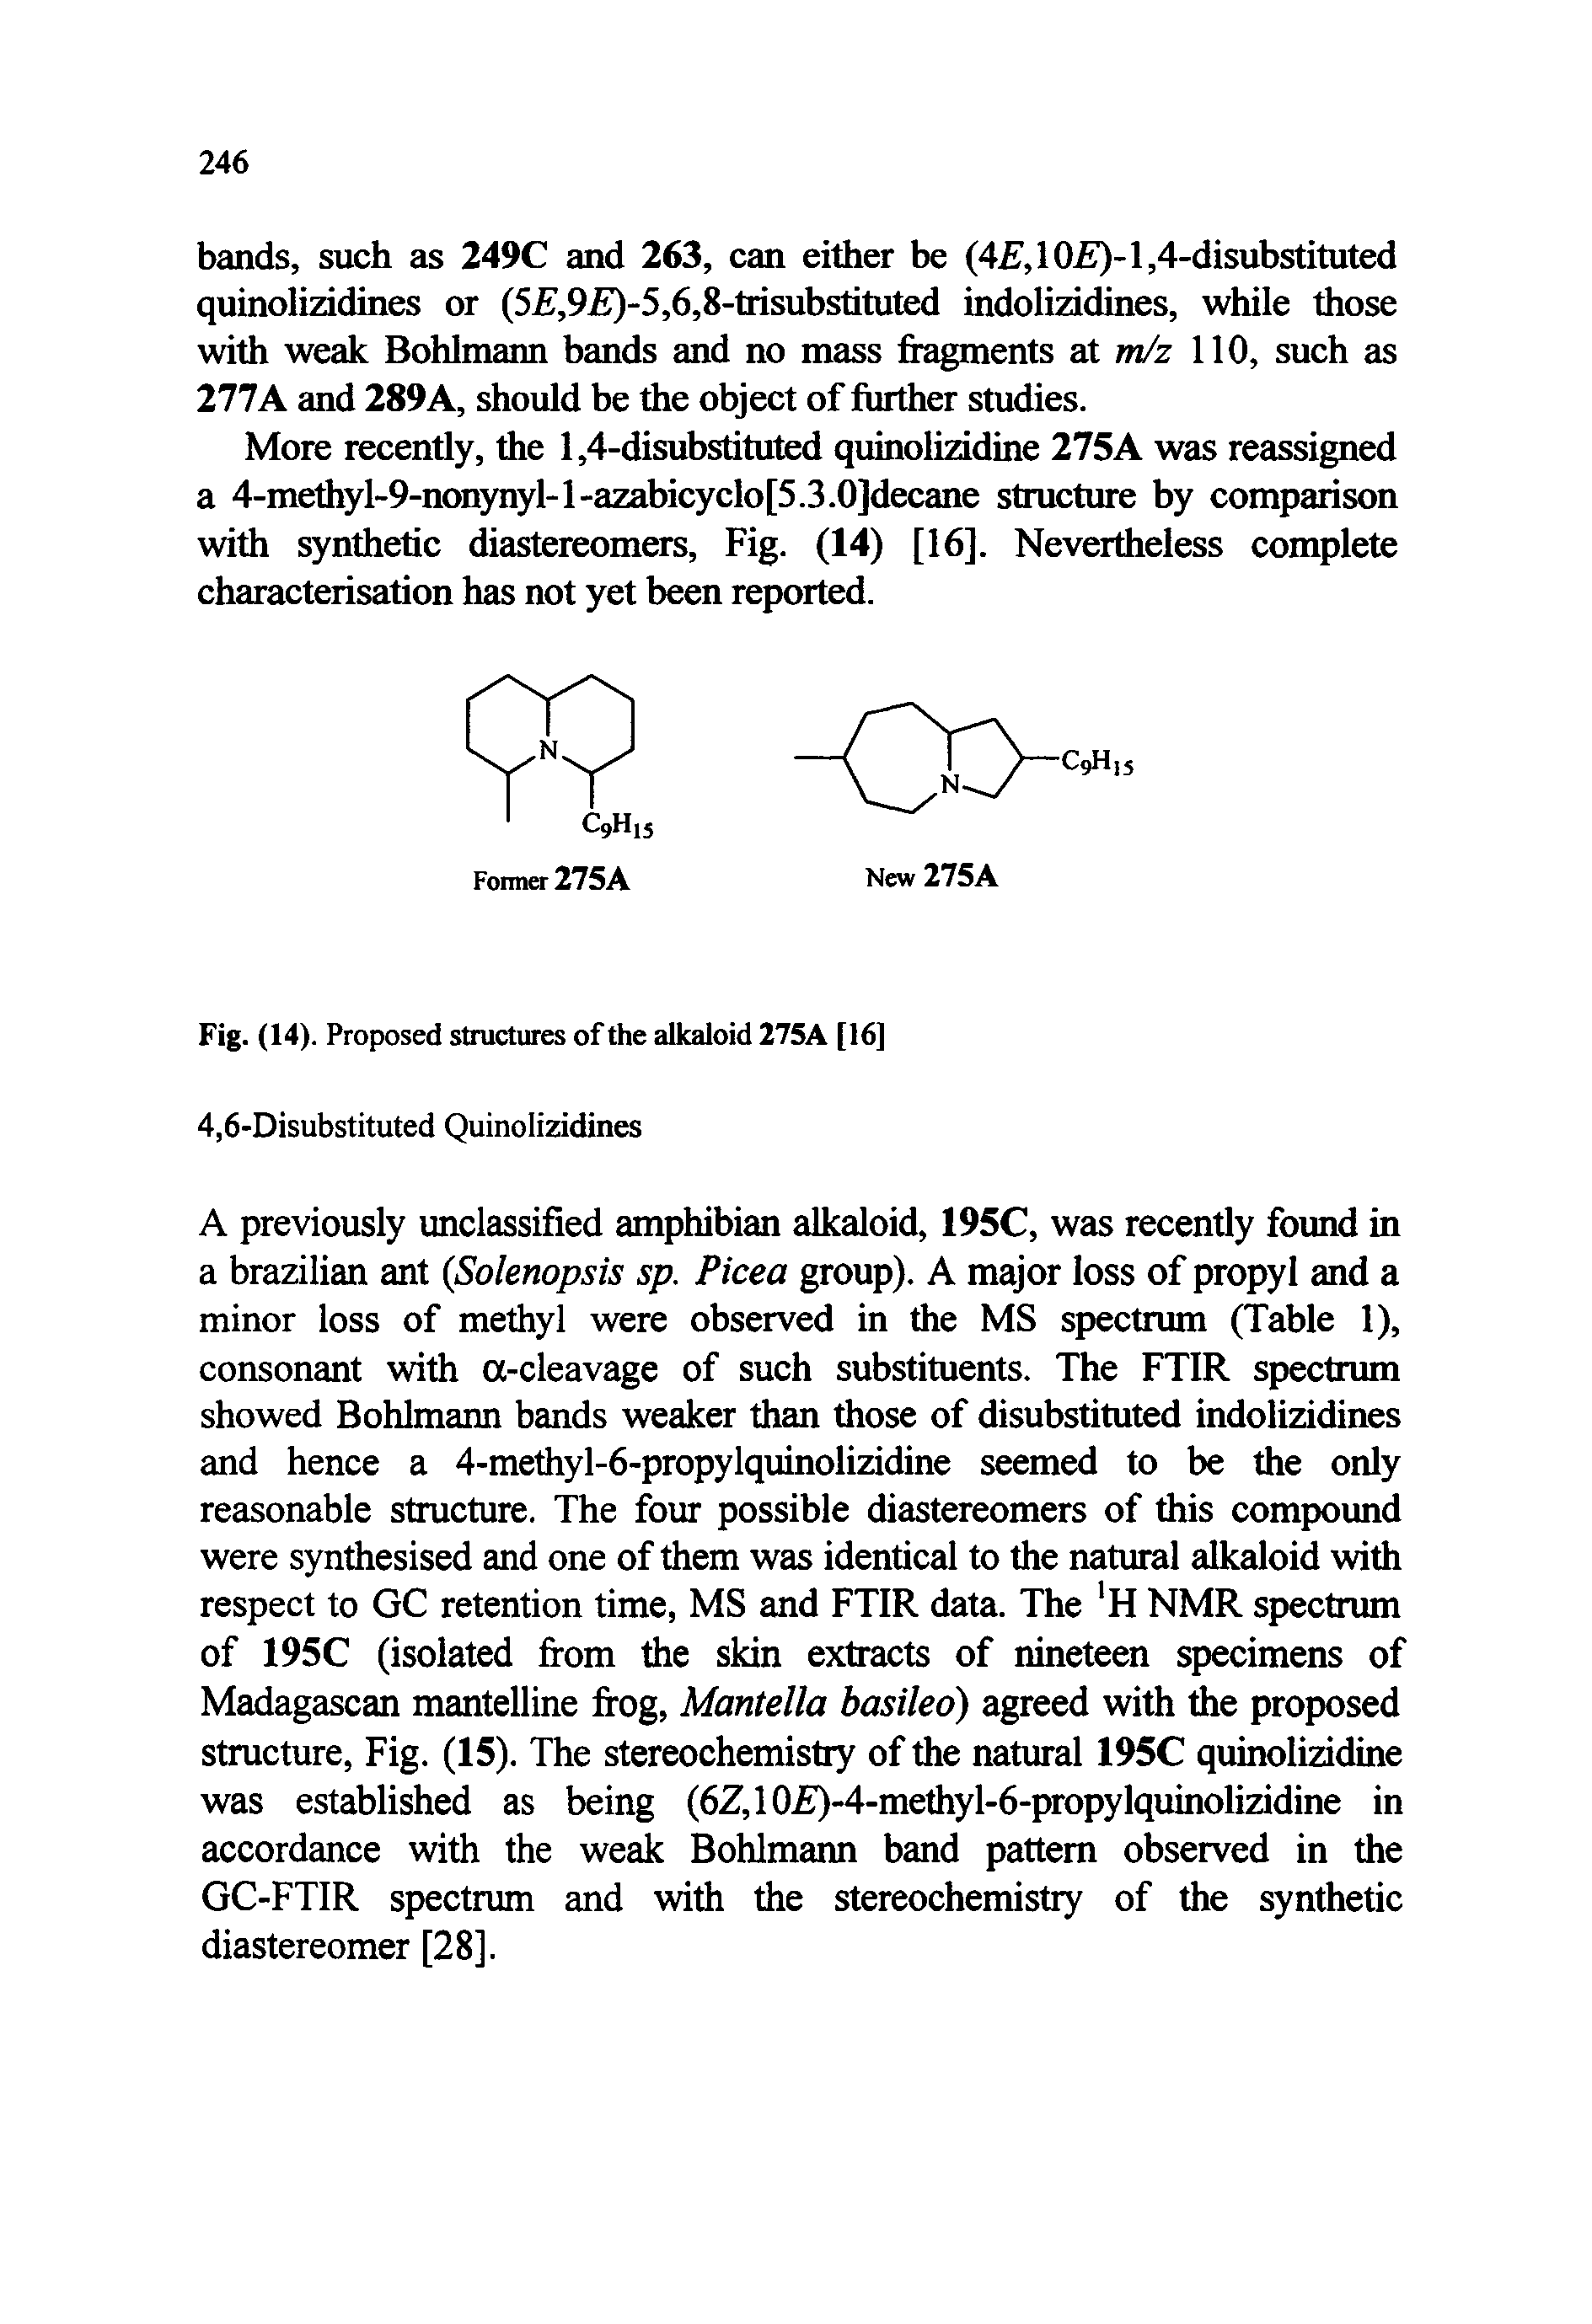 Fig. (14). Proposed structures of the alkaloid 275A [16] 4,6-Disubstituted Quinolizidines...